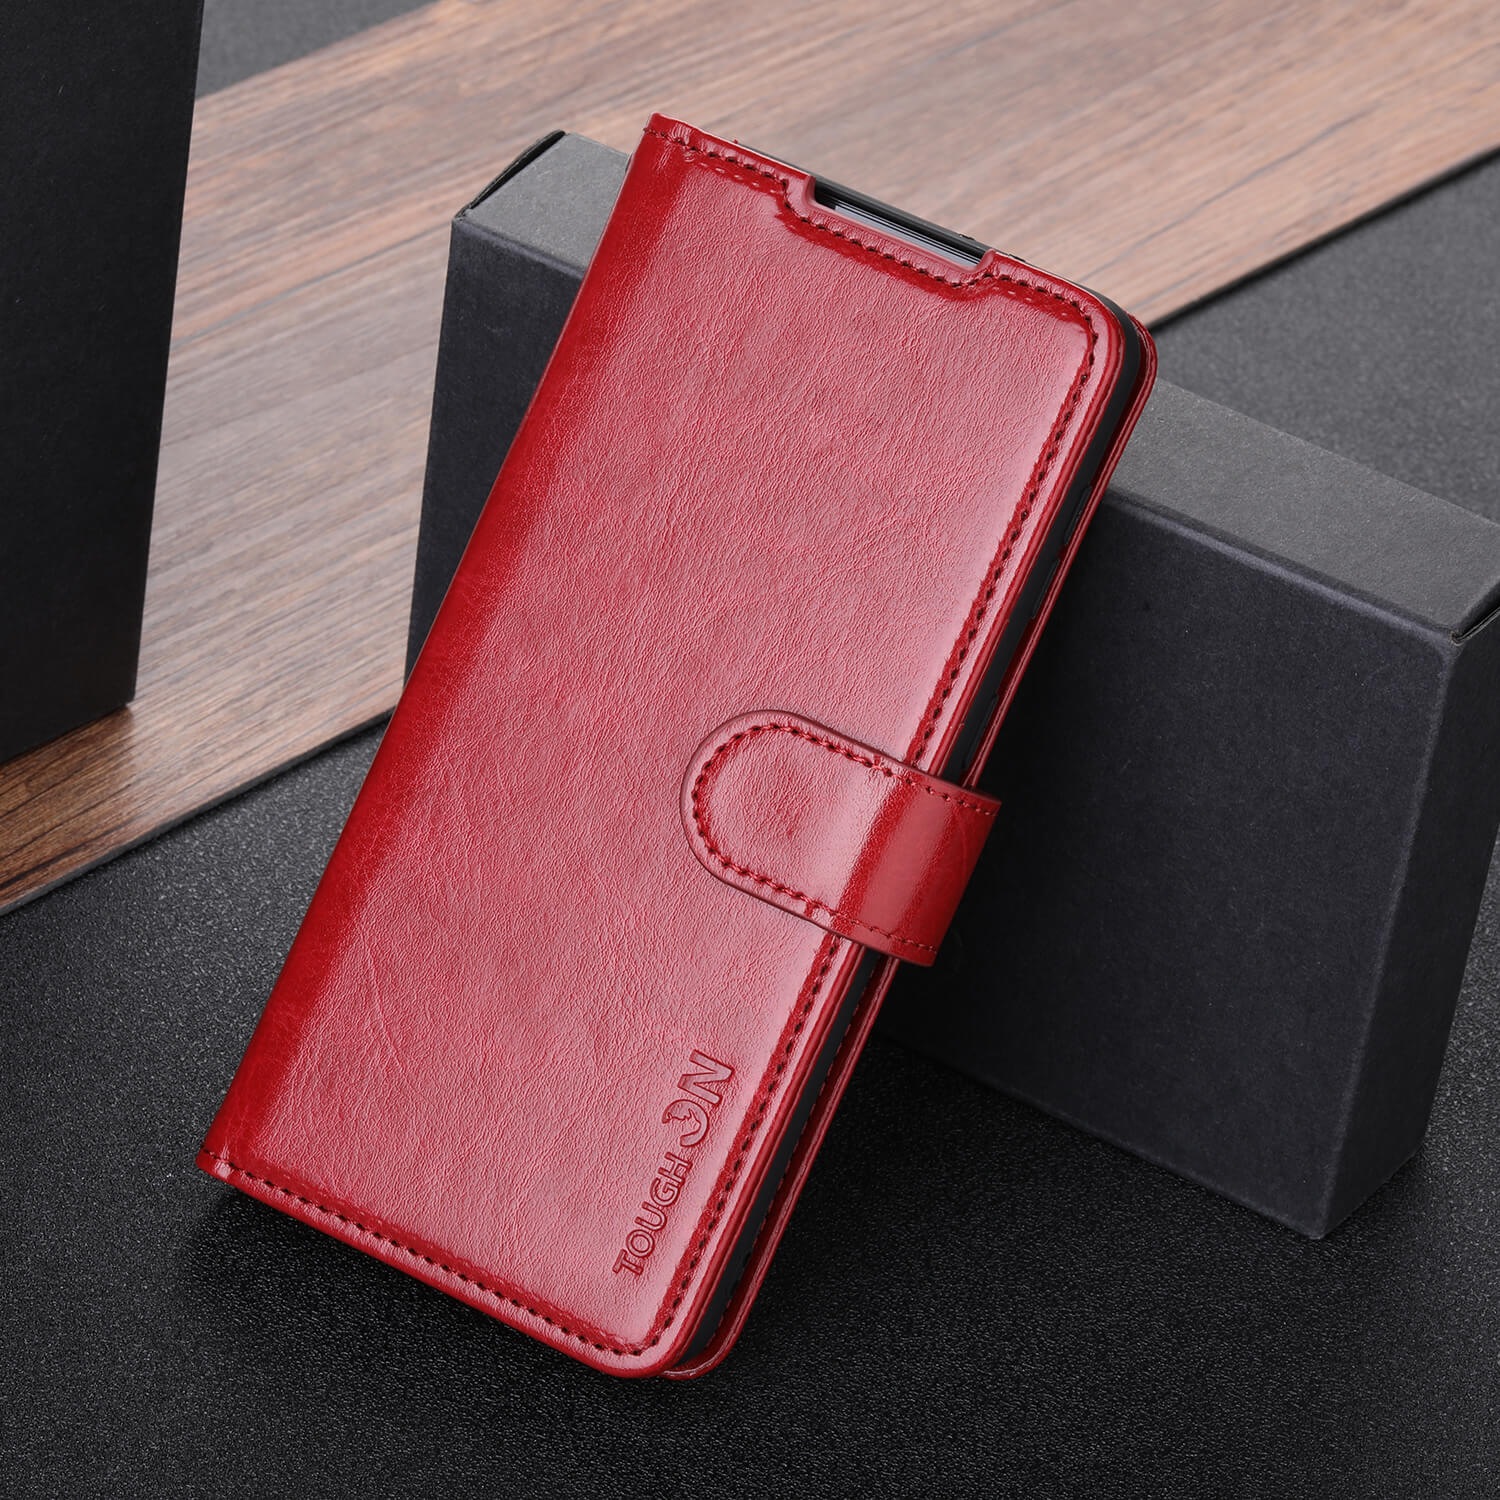 Tough On Samsung Galaxy S21 Plus Leather Case Red